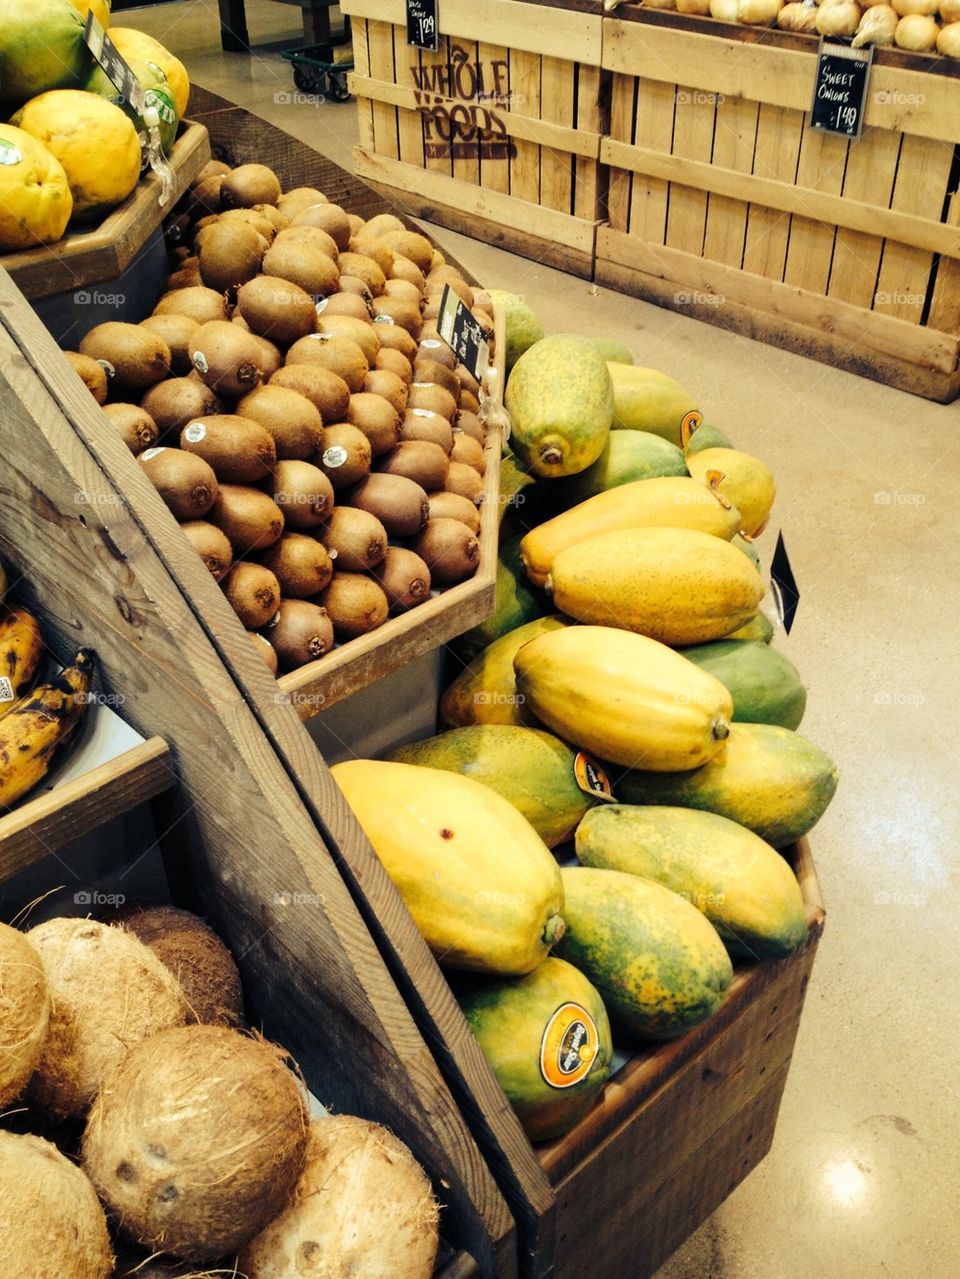 The fruit section